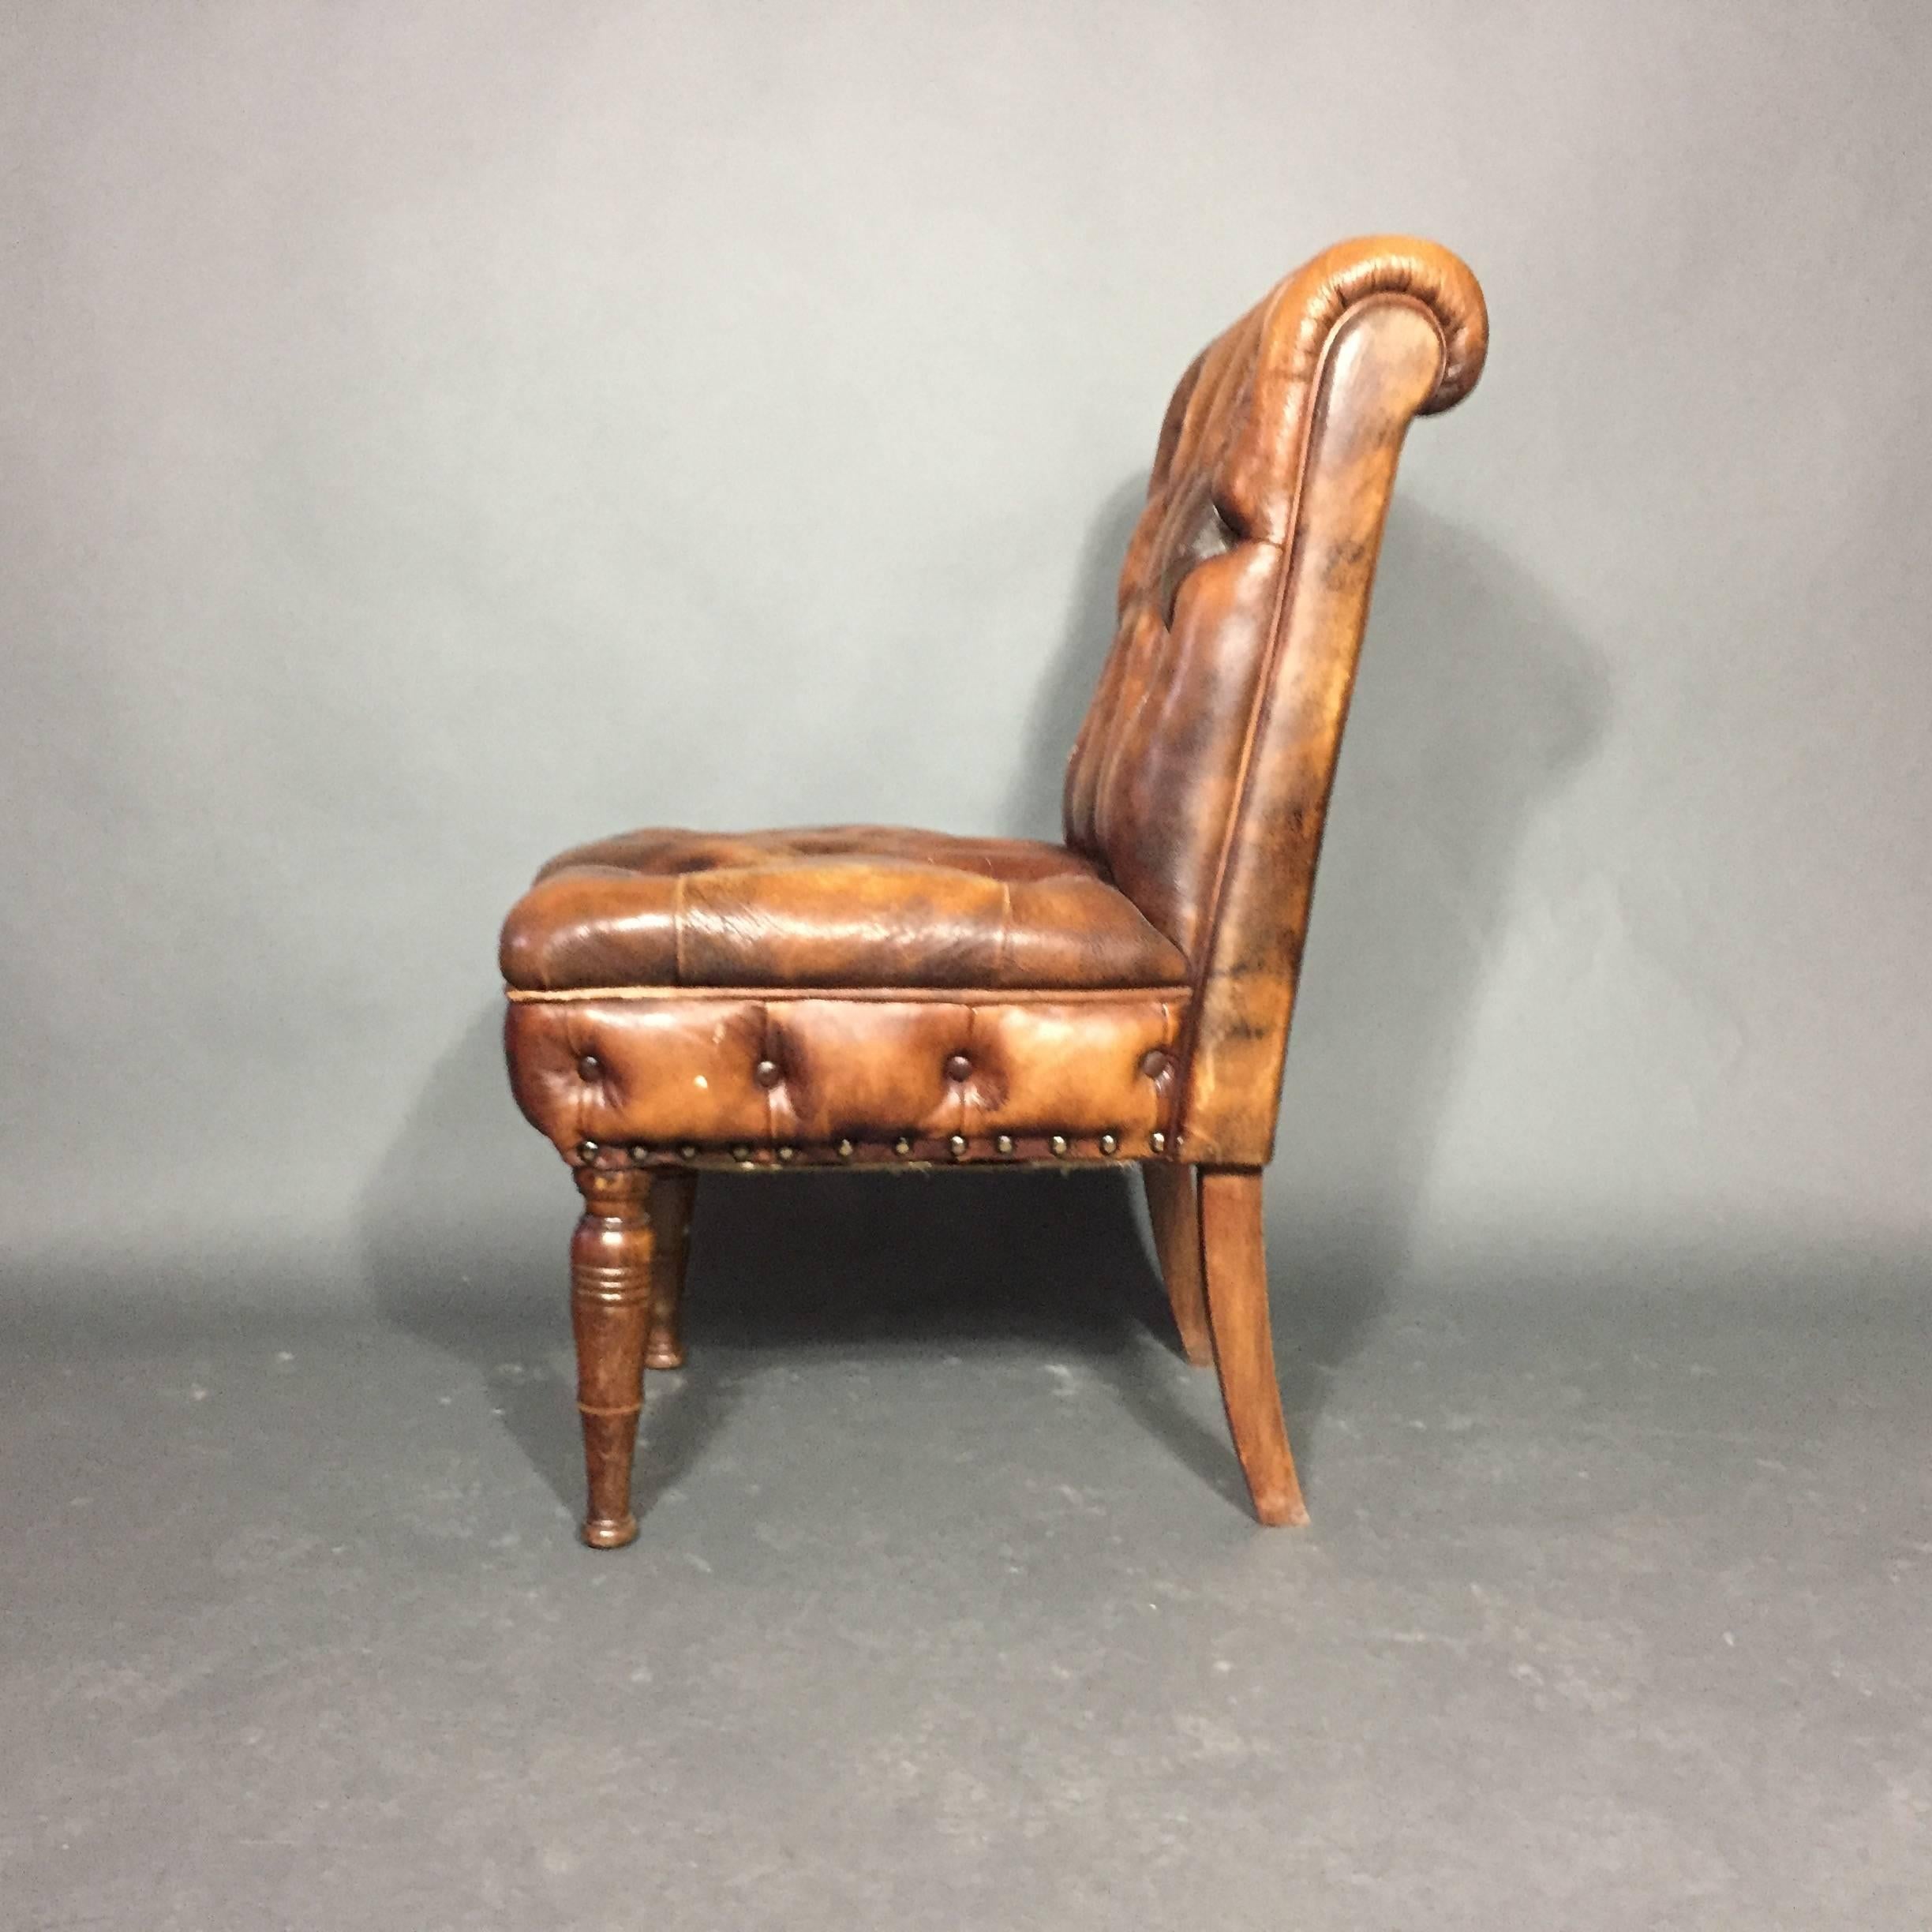 Early 20th Century English Chesterfield Slipper Chair, 1920s, Updated Leather